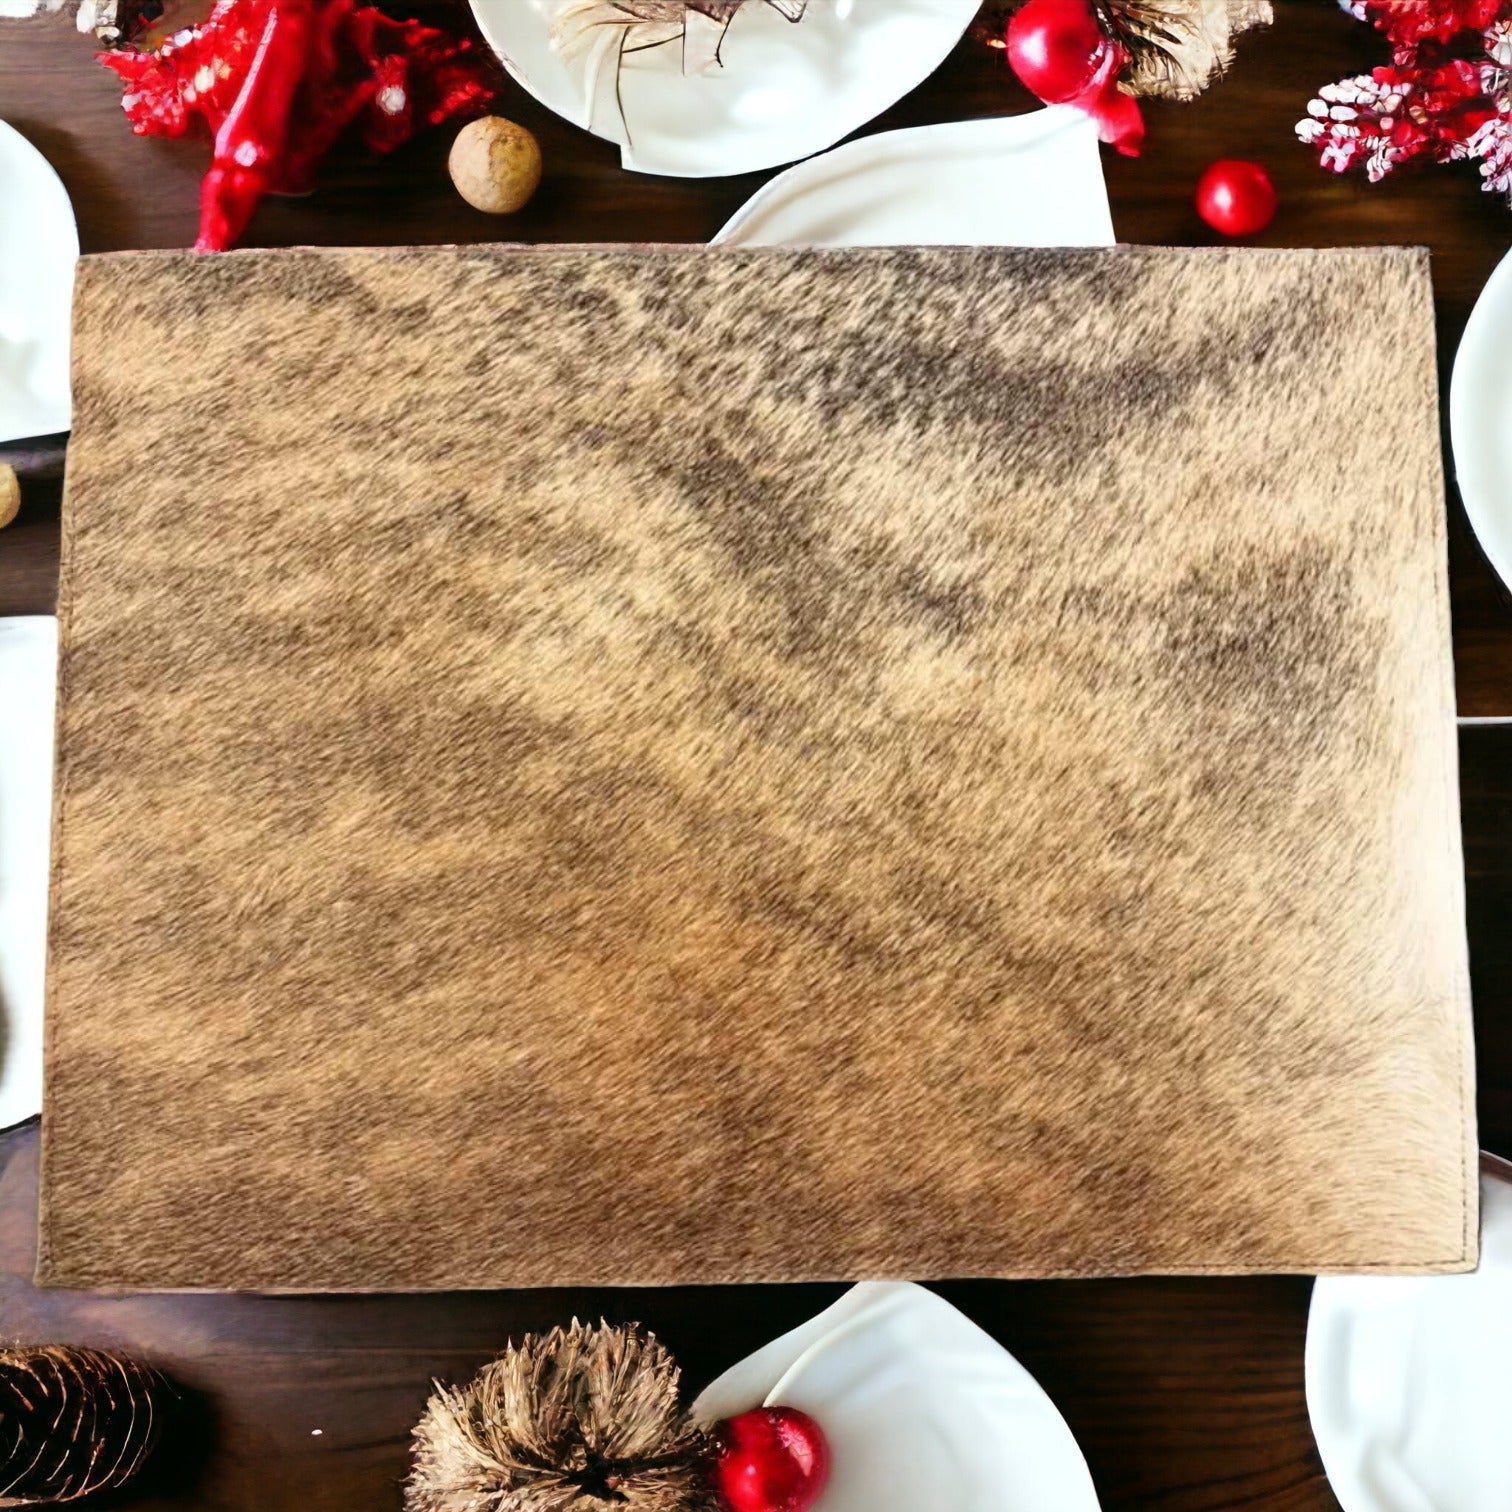 Rodeo cowhide placemats - Rodeo Cowhide RugsWILD Brindle